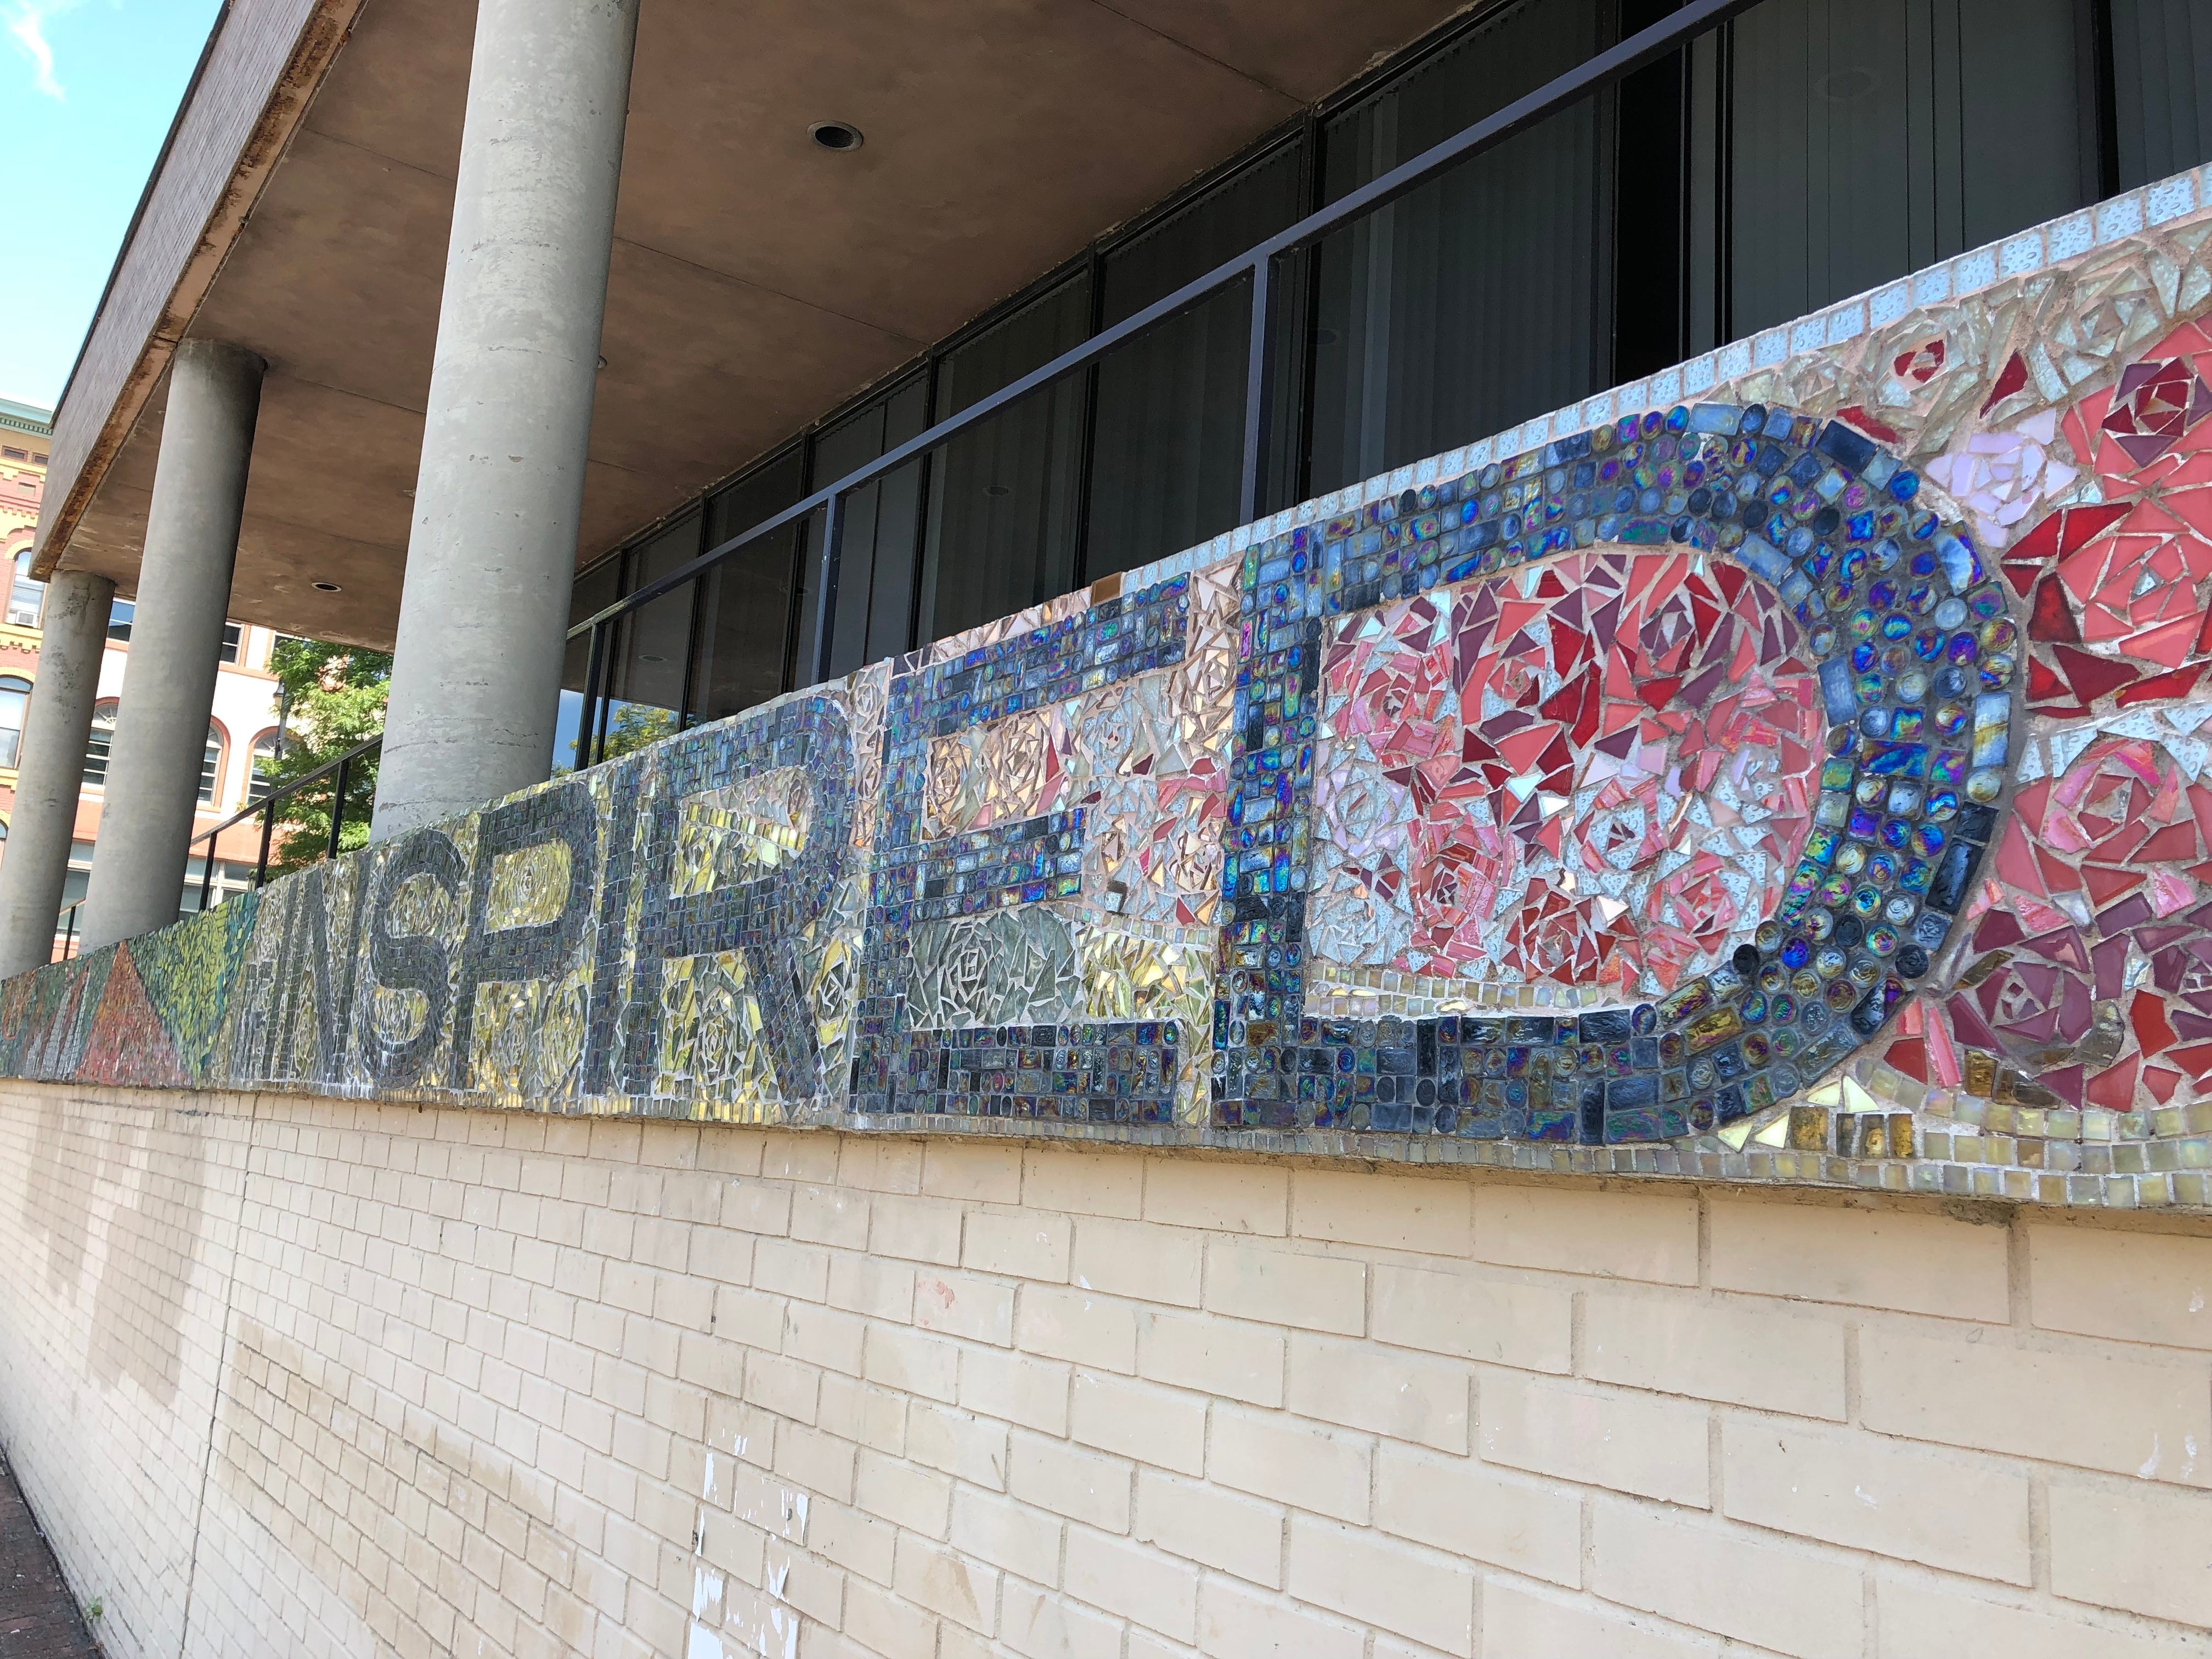 Facing the Chenango River, the edge of 2 Court St. in Binghamton is decorated with small pieces of colored glass. Artist Emily Jablon included the phrase 'Be Inspired, Be Binghamton' in the completed mosaic.